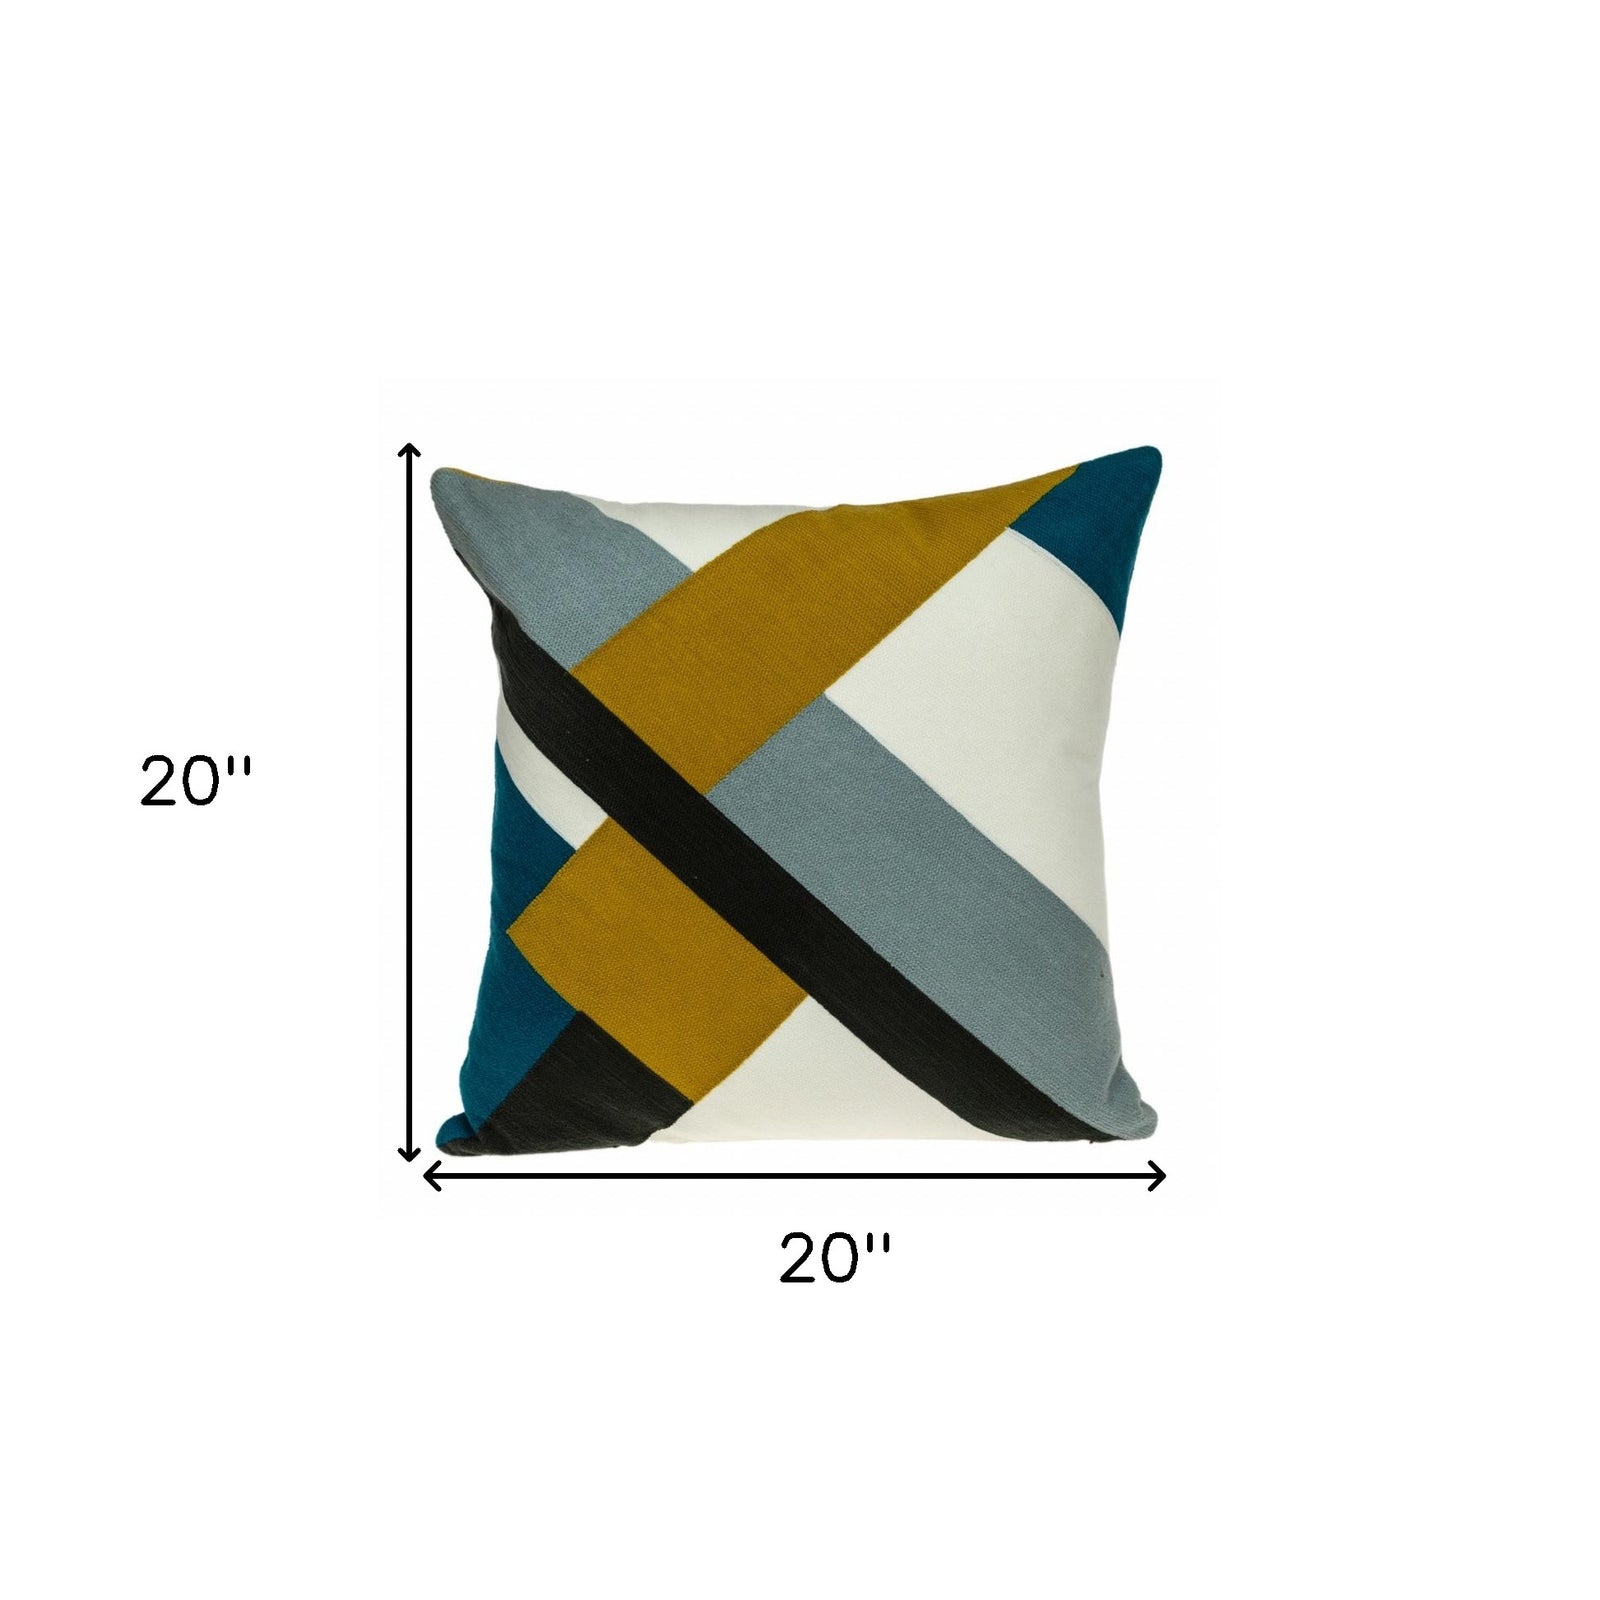 20" X 20" Black And Brown Geometric Zippered 100% Cotton Throw Pillow